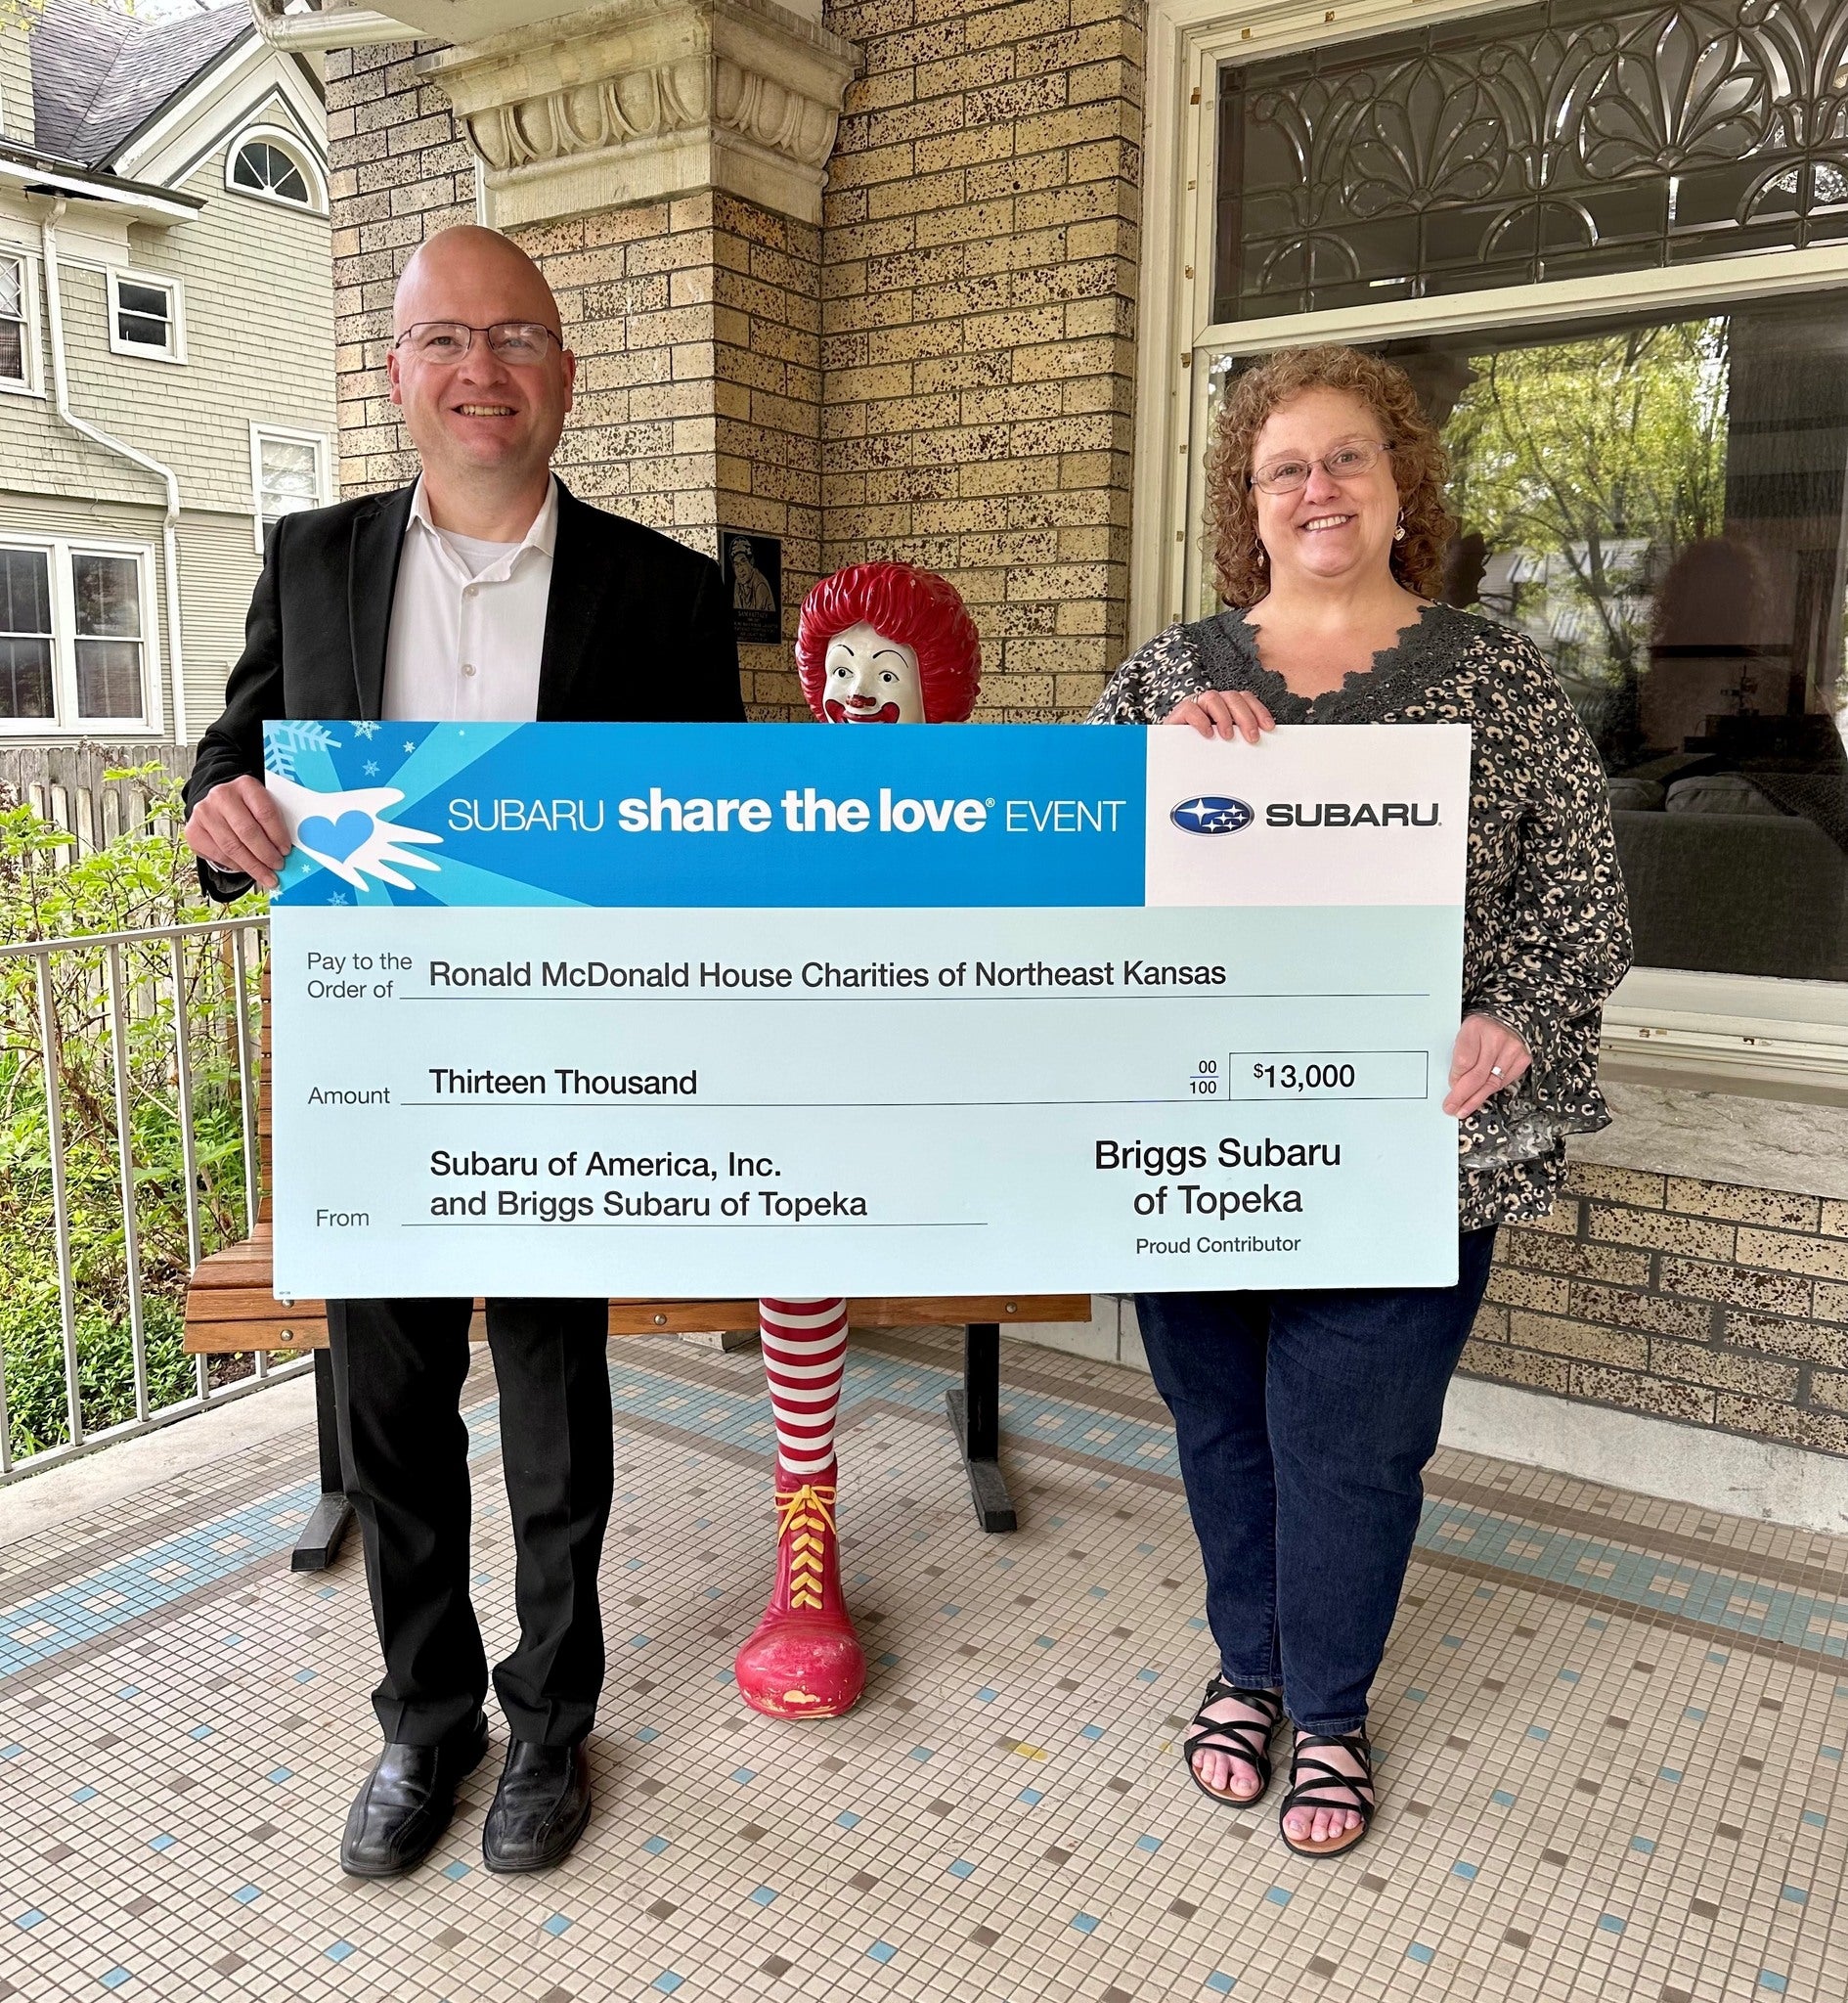 Delivering Big check to Ronald McDonald House